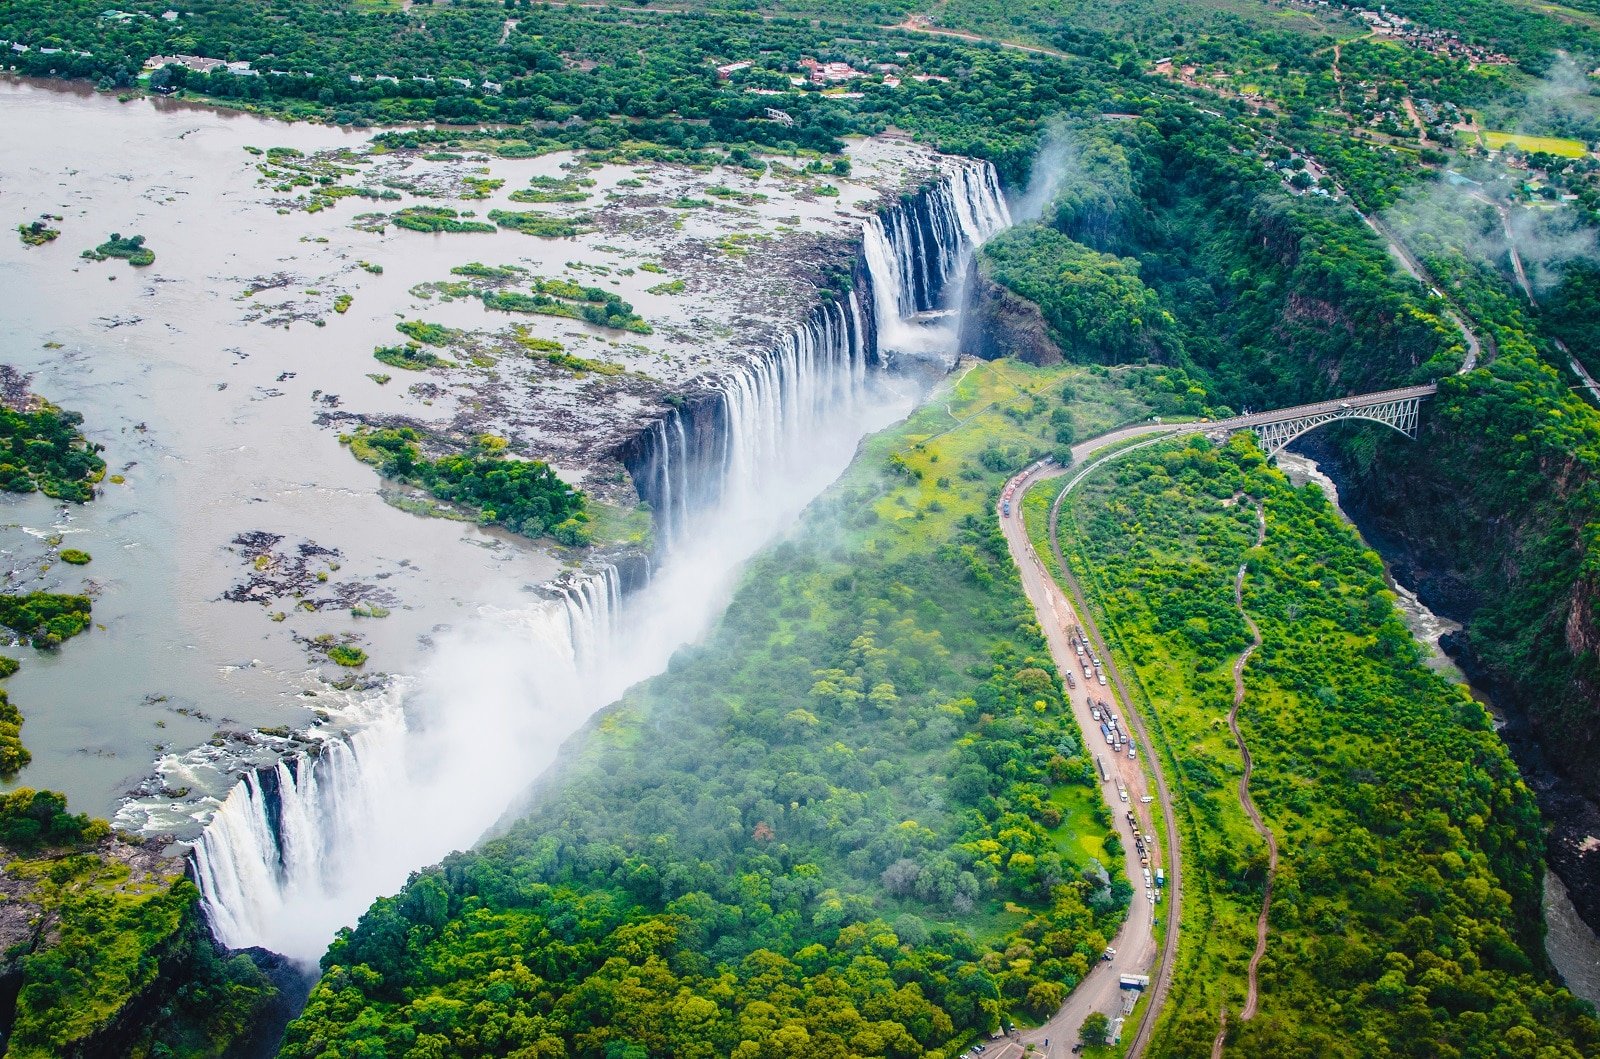 <p><span>Venture to Victoria Falls, a UNESCO World Heritage site straddling Zambia and Zimbabwe. Known locally as “The Smoke That Thunders,” this enormous waterfall is one of the largest and most famous in the world. The best views are from the Zimbabwean side, where you can see the full width and height of the falls. Consider bungee jumping or white-water rafting on the Zambezi River for an adrenaline rush. The lunar rainbow, visible during full moon nights, adds a mystical element to the falls.</span></p> <p><b>Insider’s Tip: </b><span>Take a helicopter ride for a stunning aerial view. </span></p> <p><b>When To Travel: </b><span>March to May for the fullest flow. </span></p> <p><b>How To Get There: </b><span>Fly to Livingstone Airport (Zambia) or Victoria Falls Airport (Zimbabwe).</span></p>